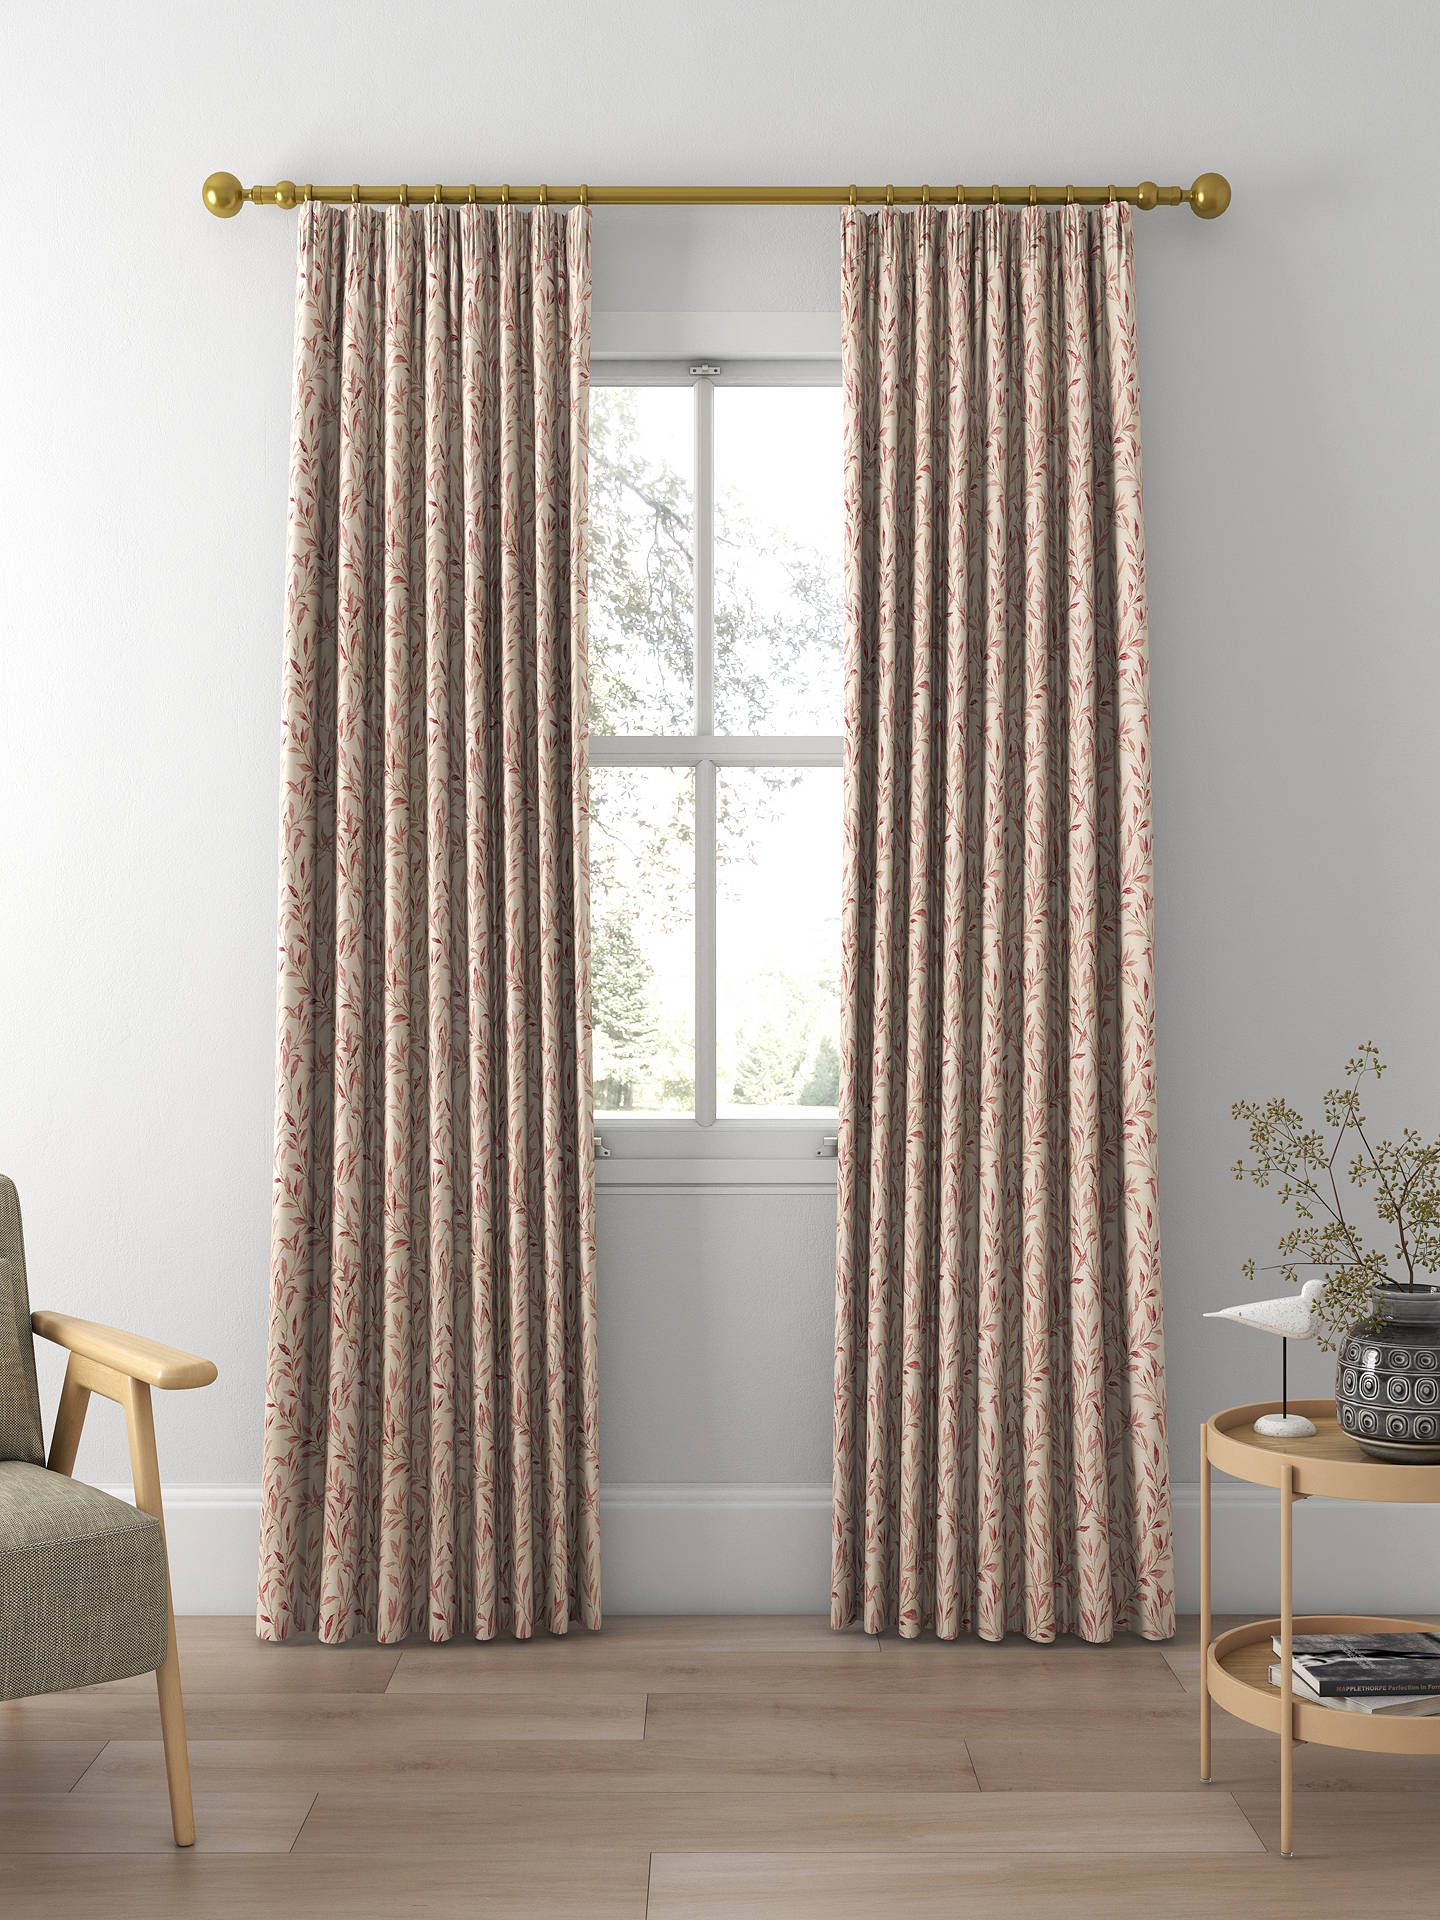 Sanderson Osier Made to Measure Curtains, Rosewood/Sepia